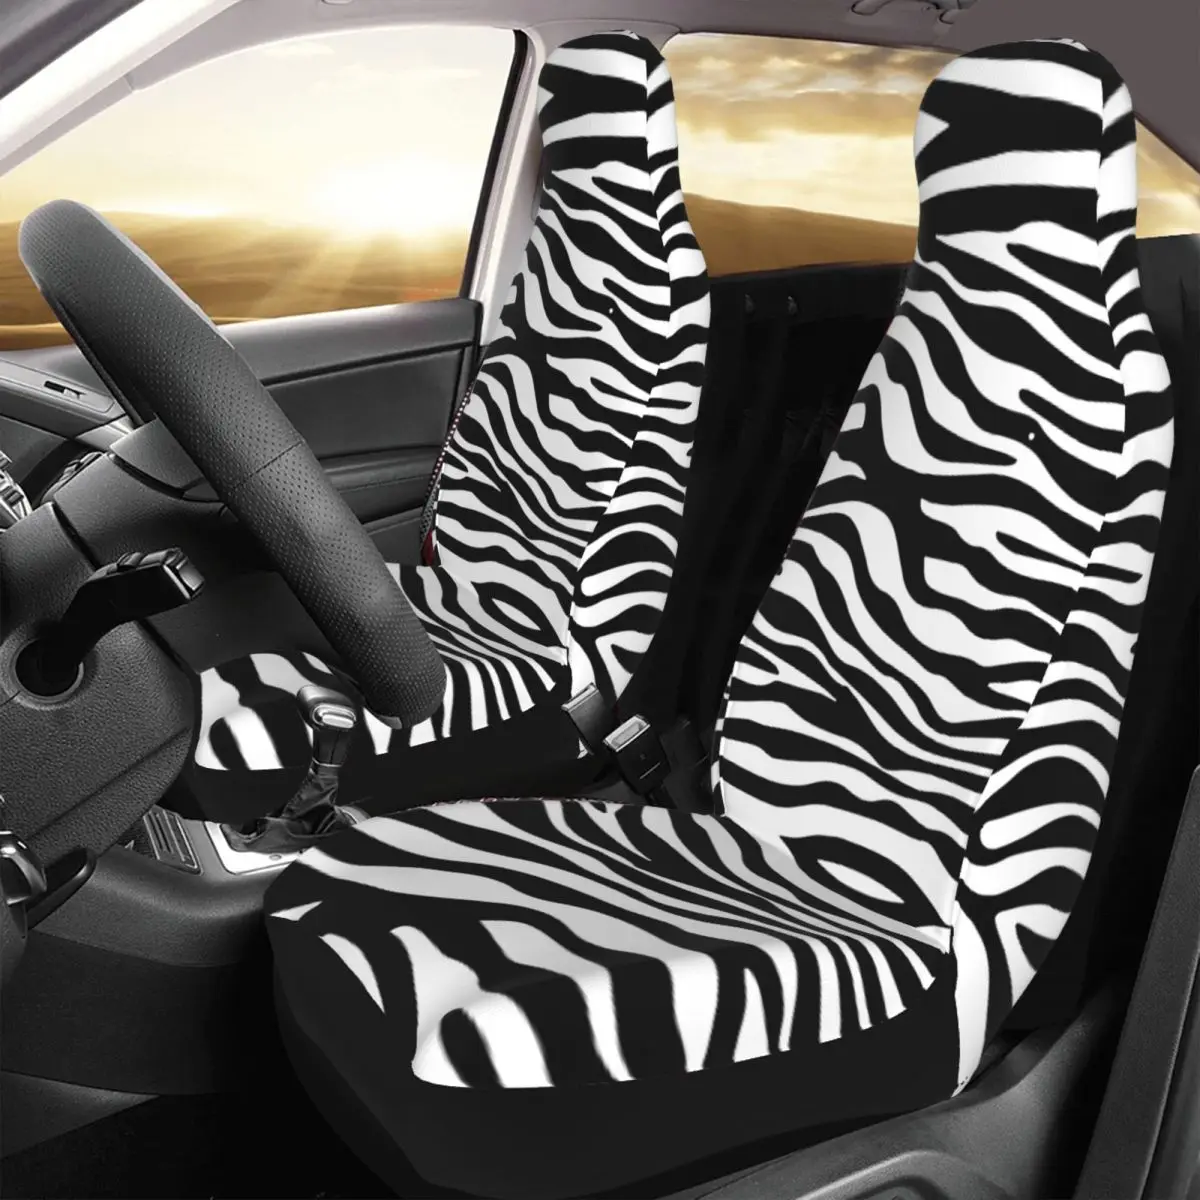 

Zebra Skin Universal Car Seat Cover Four Seasons For SUV Animal Car Seat Covers Polyester Seat Protector